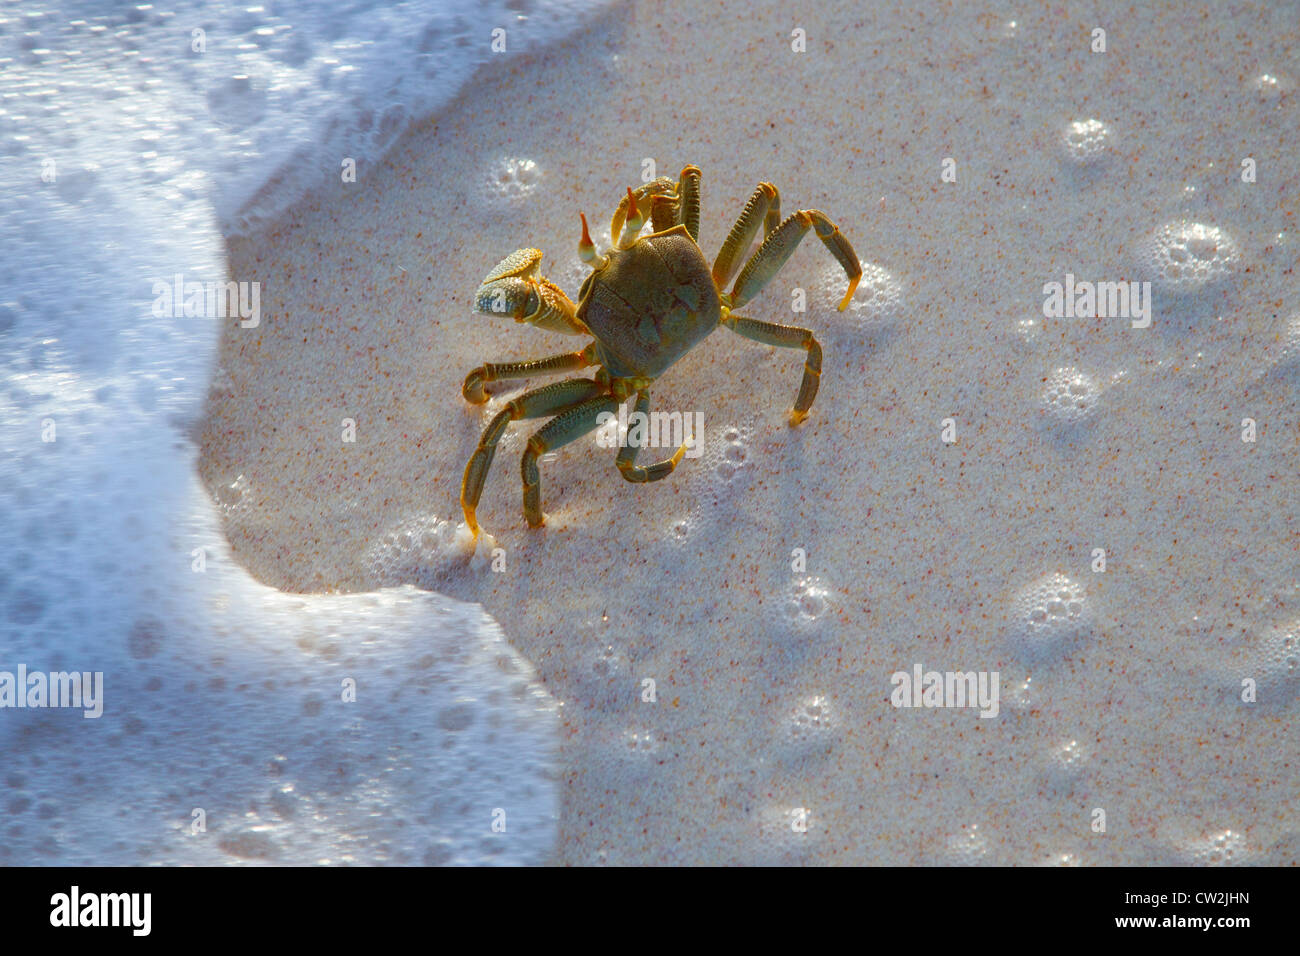 Horned ghost crab (Ocypode ceratopthalnus) on sea shore. Cousine Island.Seychelles.Dist. Tropical islands and oceans worldwide. Stock Photo